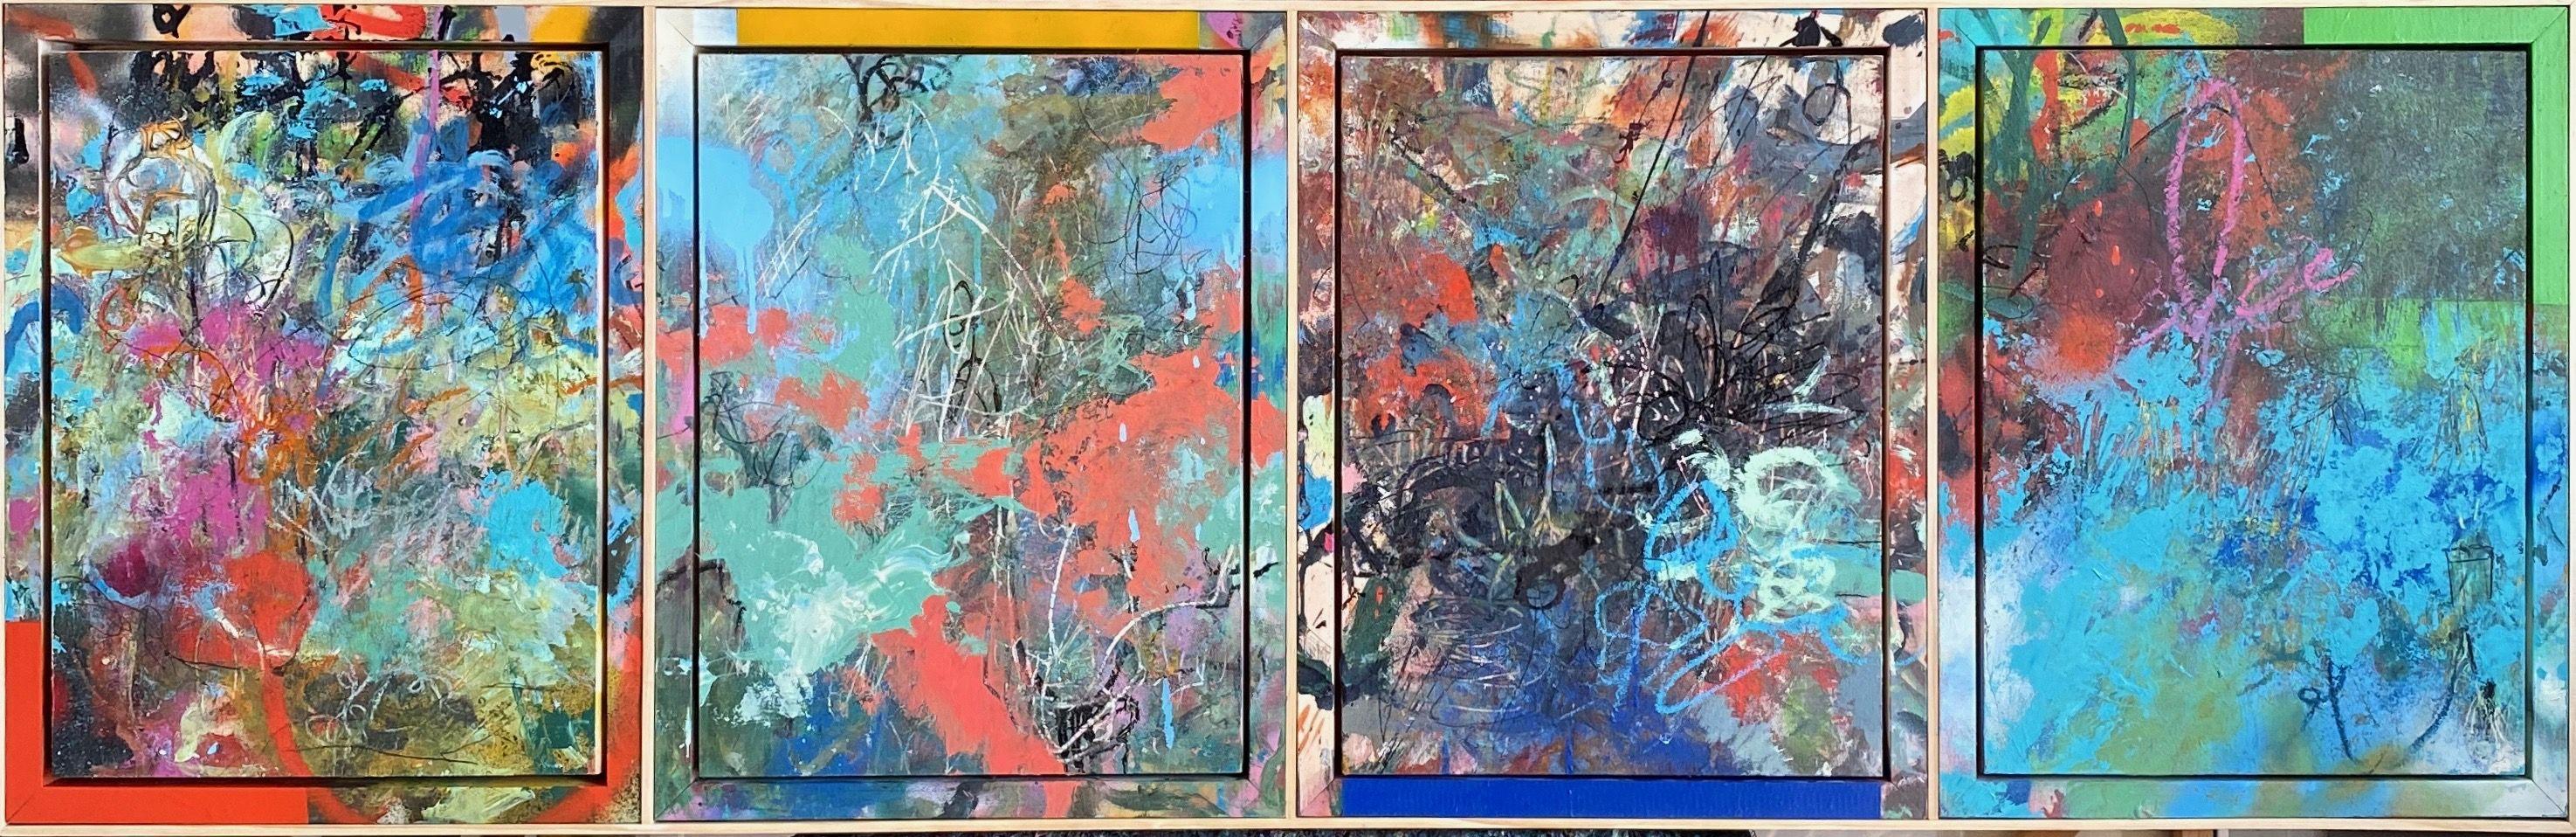 Theresa Vandenberg Donche Abstract Painting - 4 seasons, Painting, Acrylic on Wood Panel